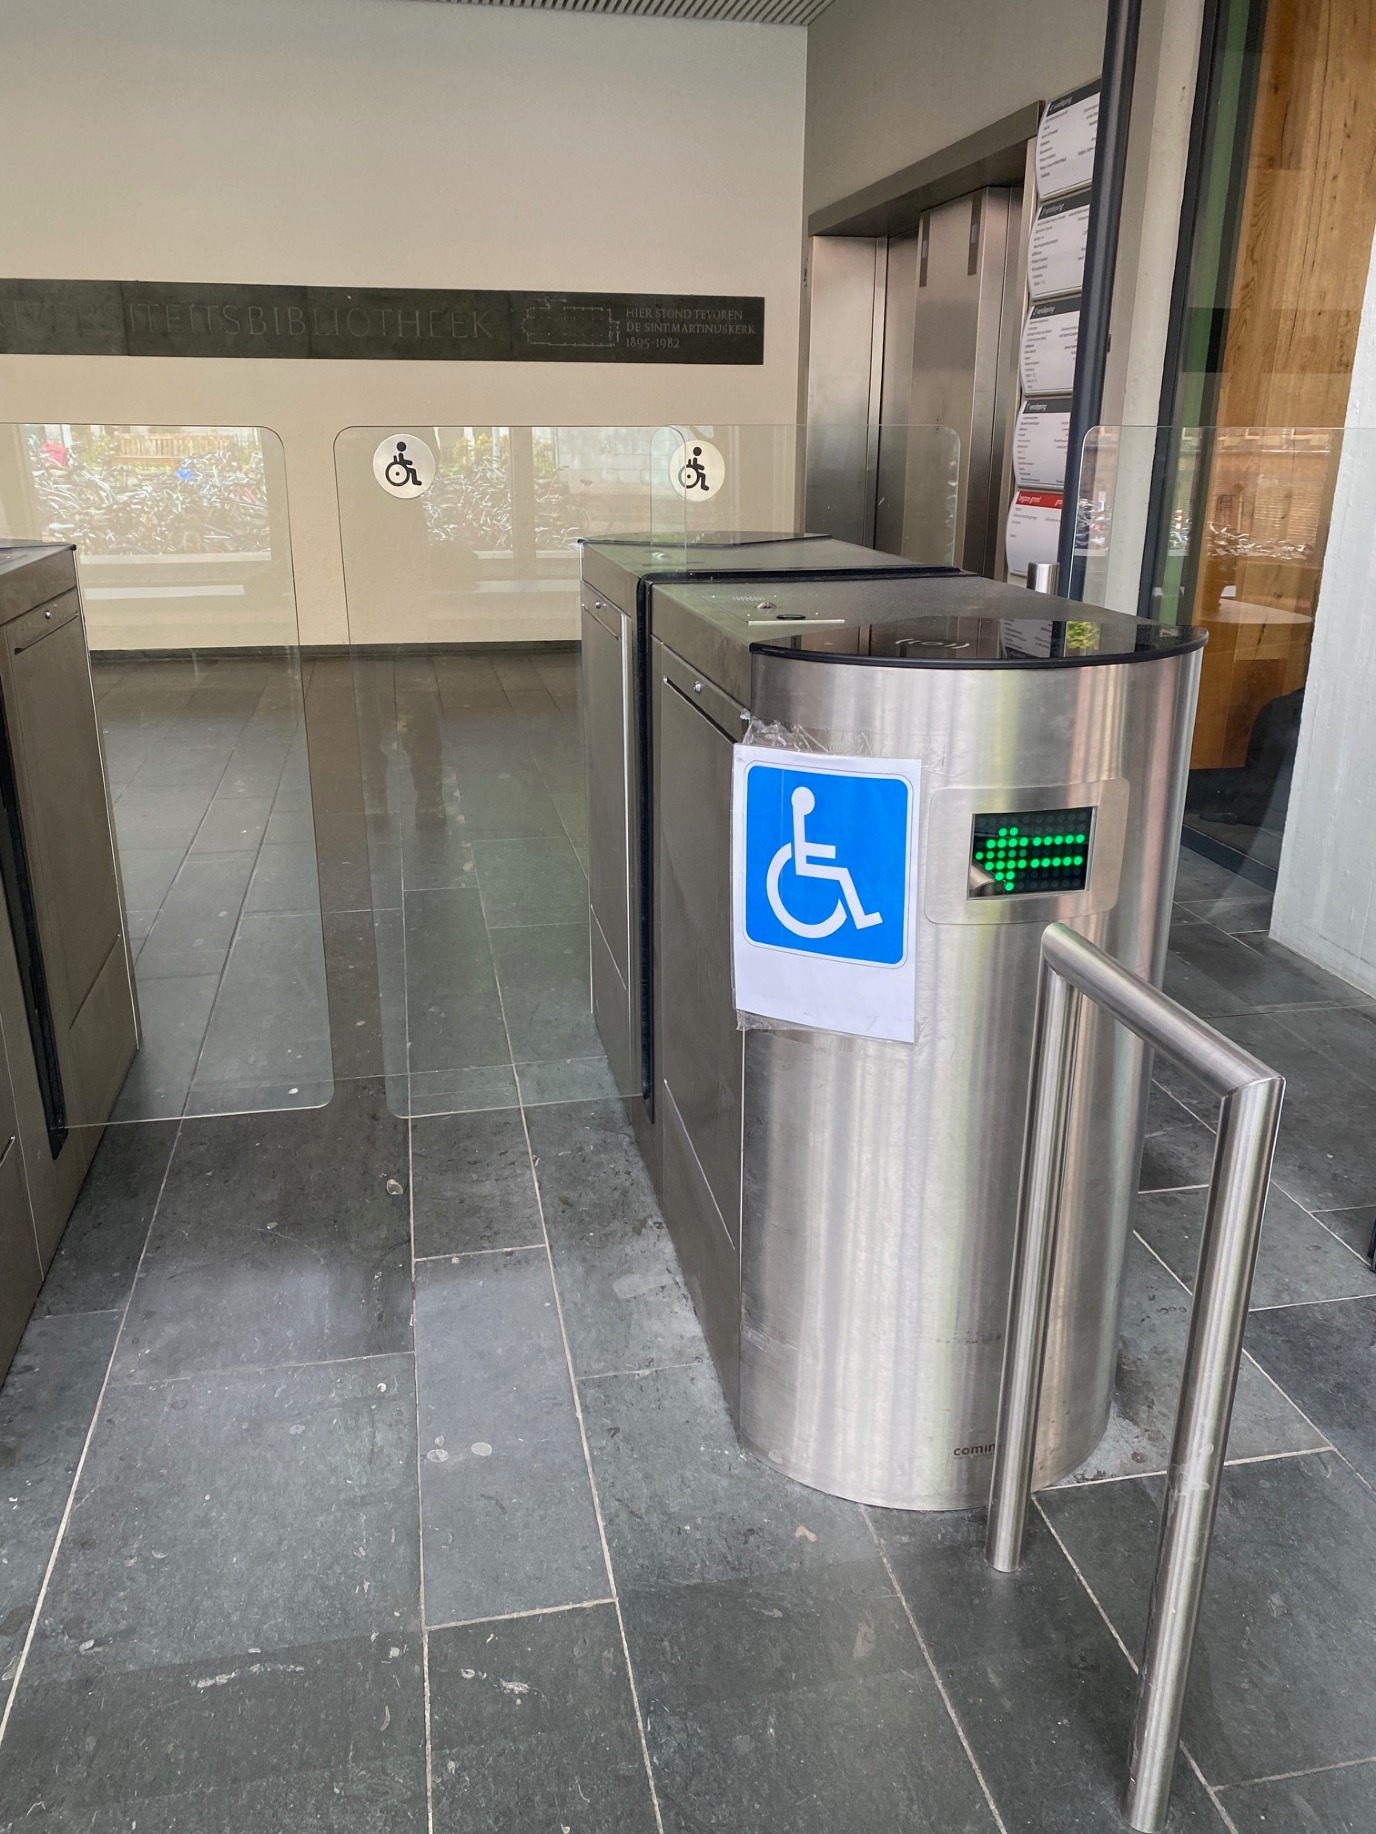 One of the entrance gates is wheelchair-friendly. It can be opened with an activated RUG pass (activation at reception).